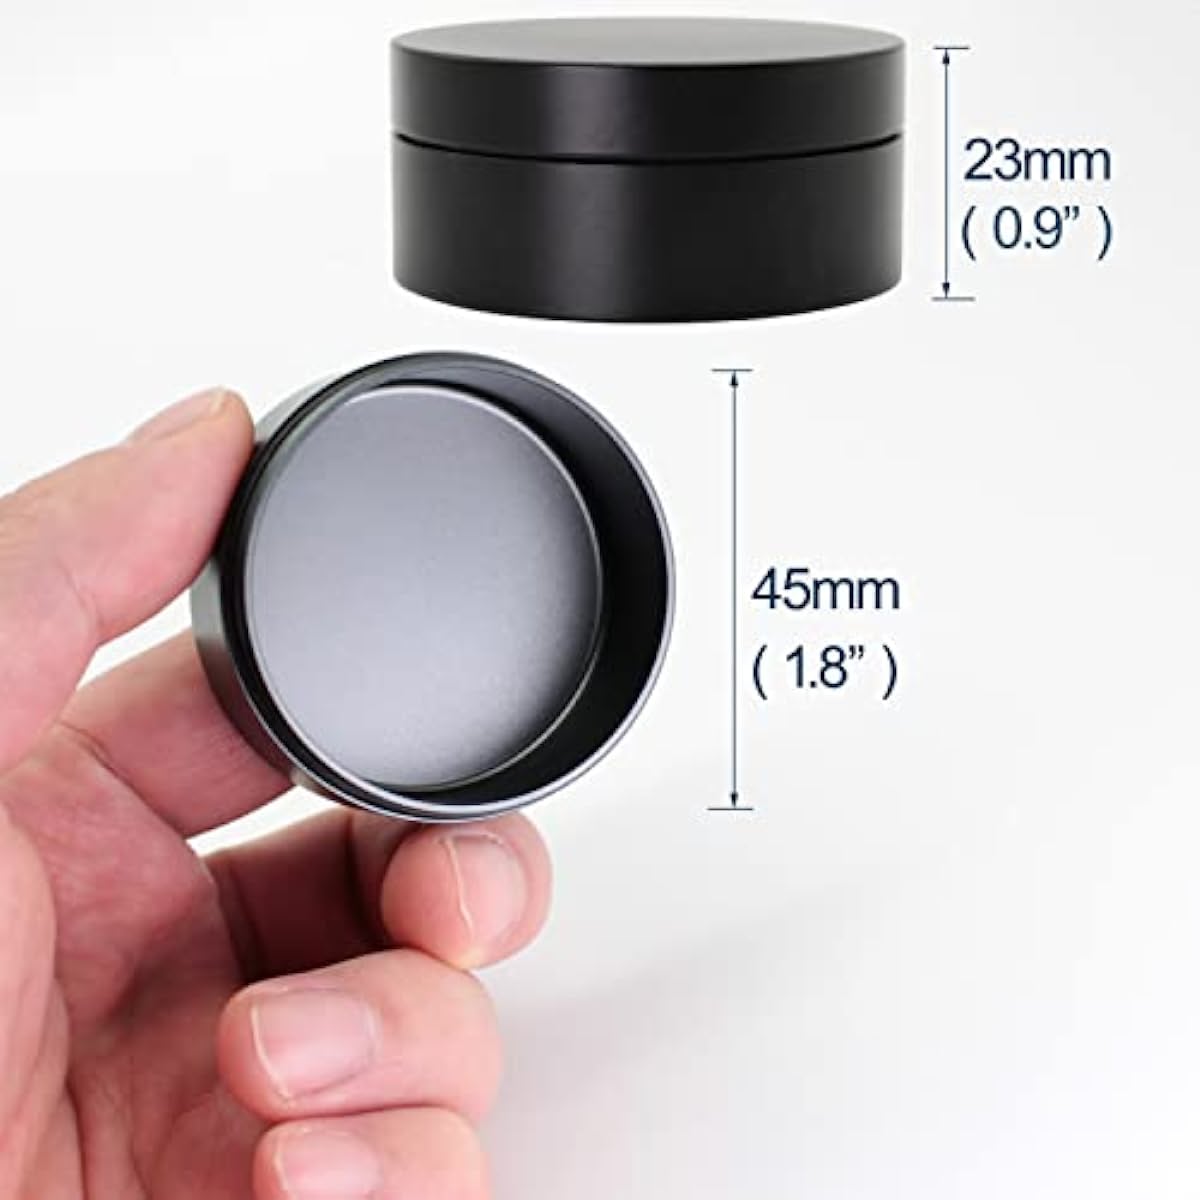 Portable Daily Pill Case, Heavy Duty Aluminium Alloy Round Pill Box, Waterproof Travel Pill Organizer, Pocket Purse Medicine Vitamin Holder EDC Container for Outdoor Camping Working